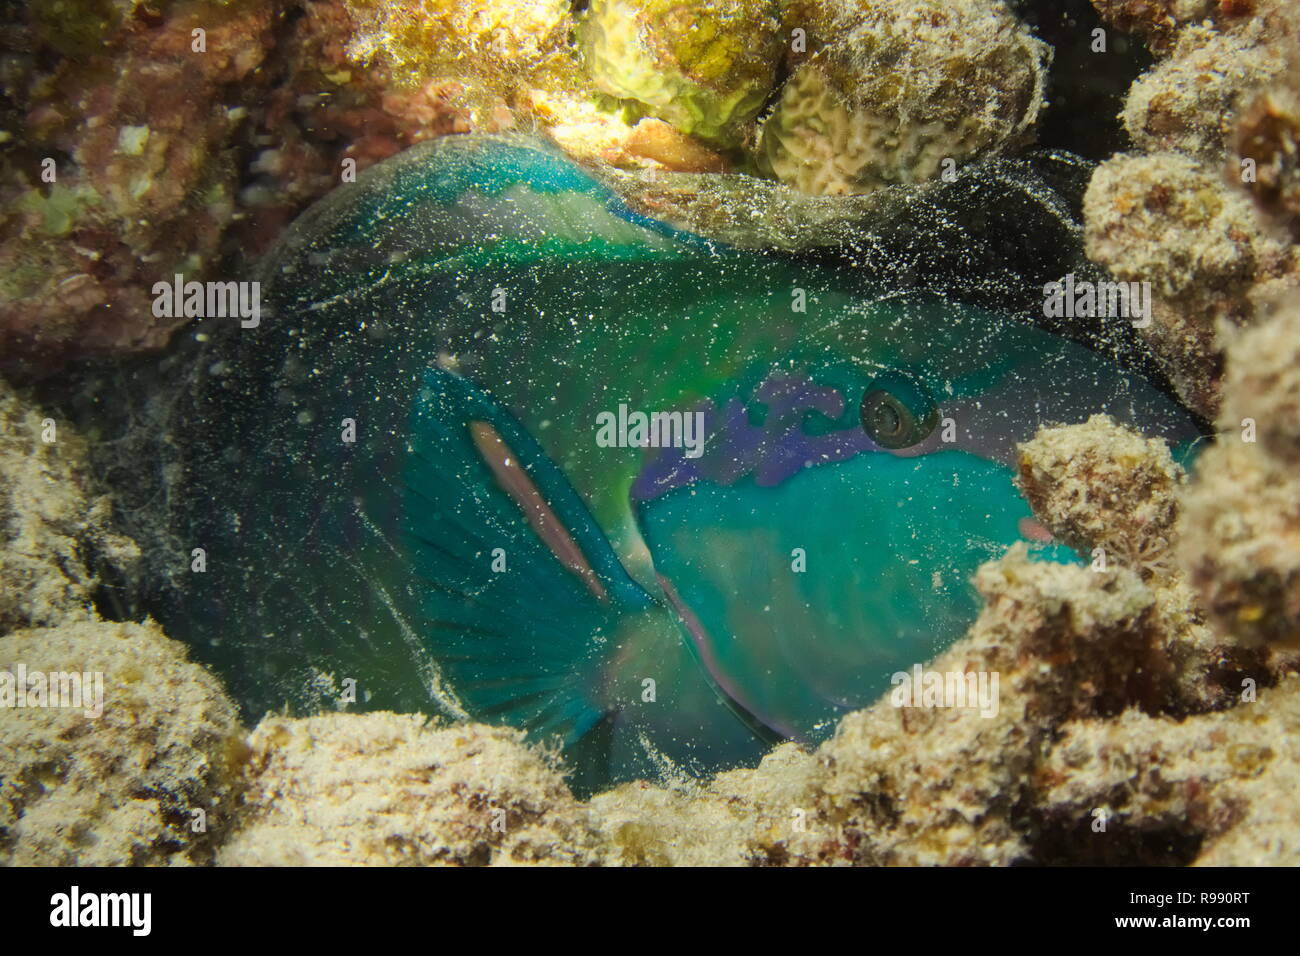 A parrot fish sleeping in its protective mucus bubble Stock Photo